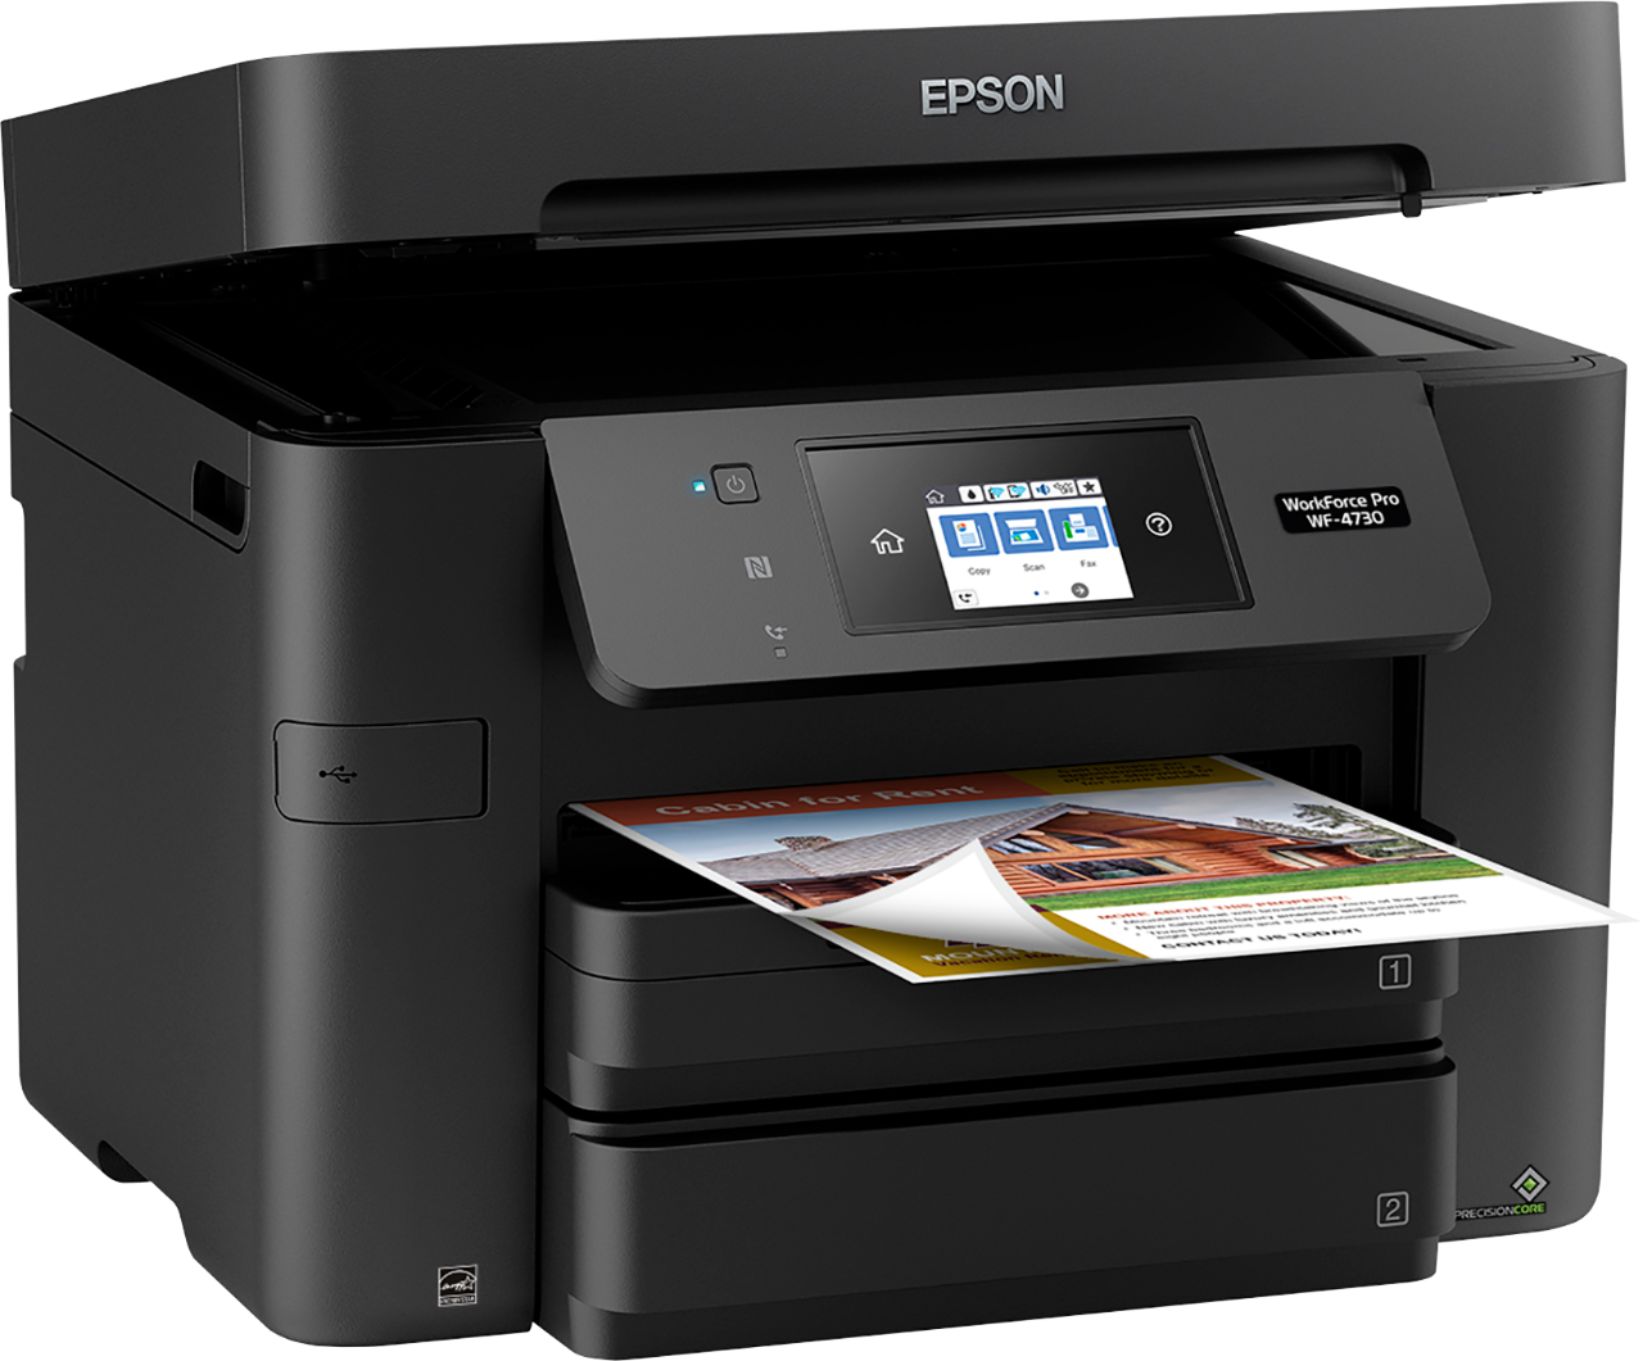 Scanner with Wi-Fi Direct Copier Epson WorkForce Pro WF-4730 Wireless All-in-One Color Inkjet Printer